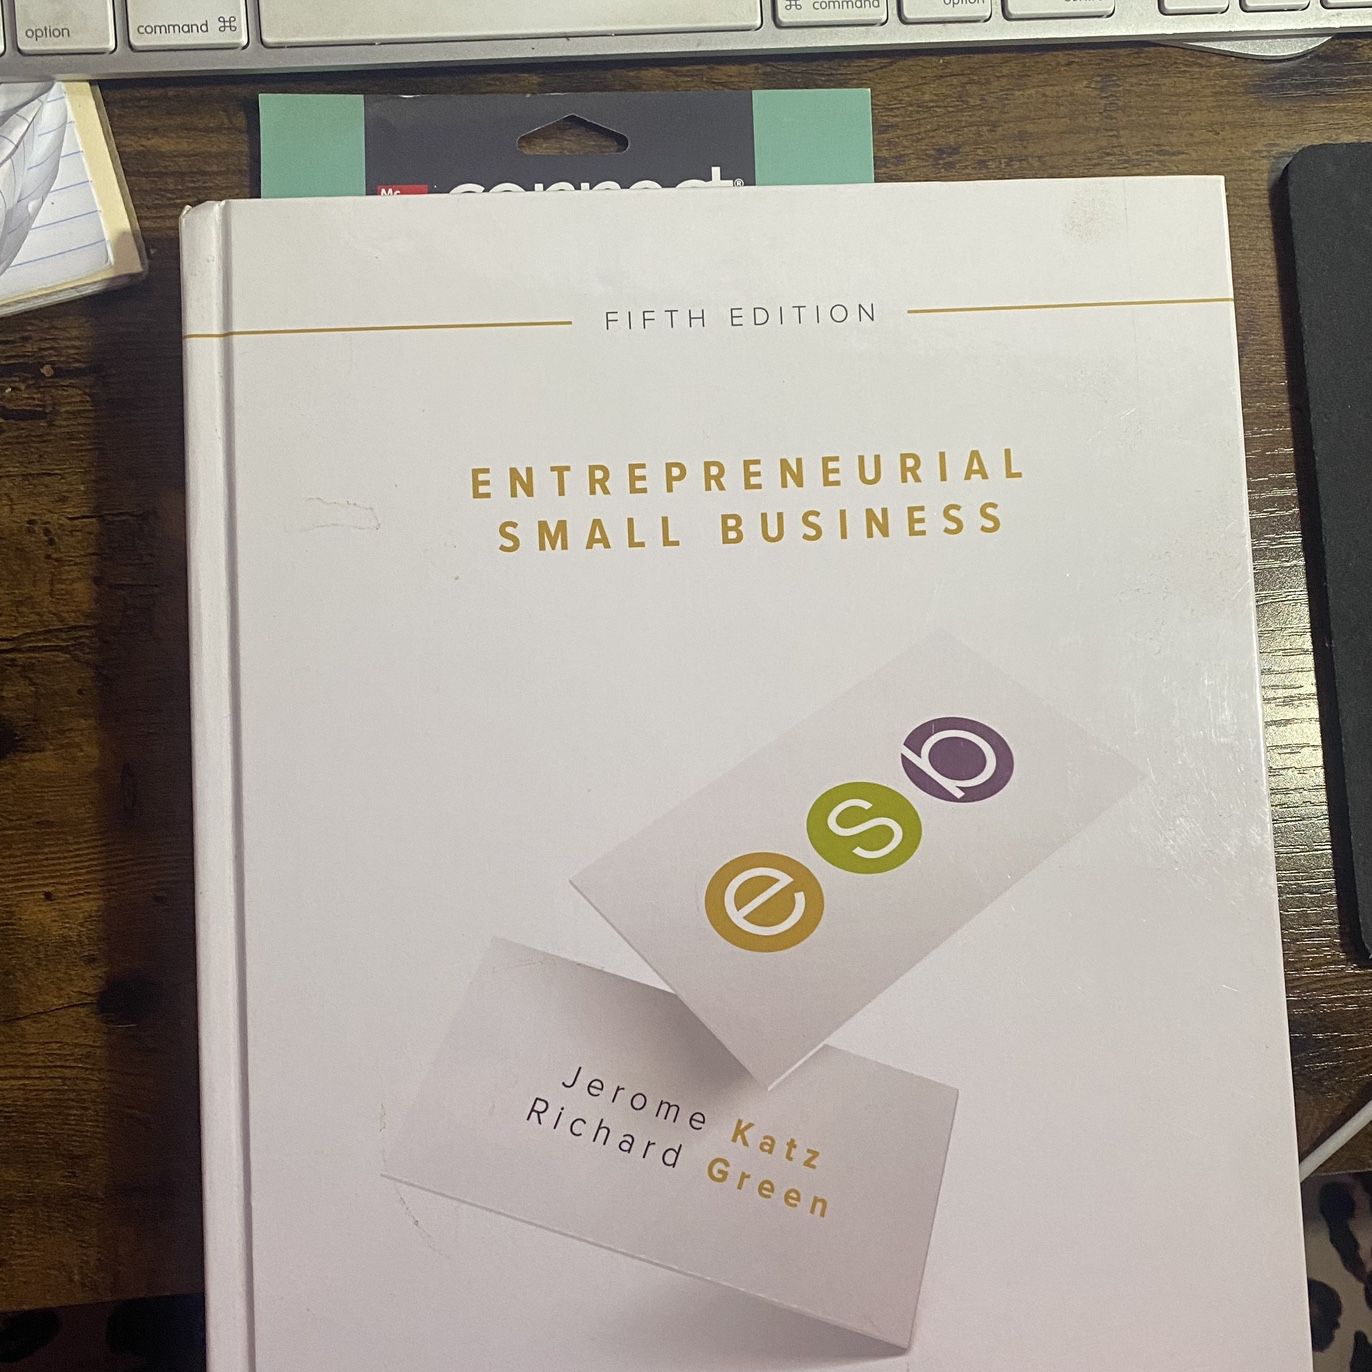 in　Sale　CA　College　Entrepreneurial　Victorville,　Small　Textbook　for　Business　OfferUp